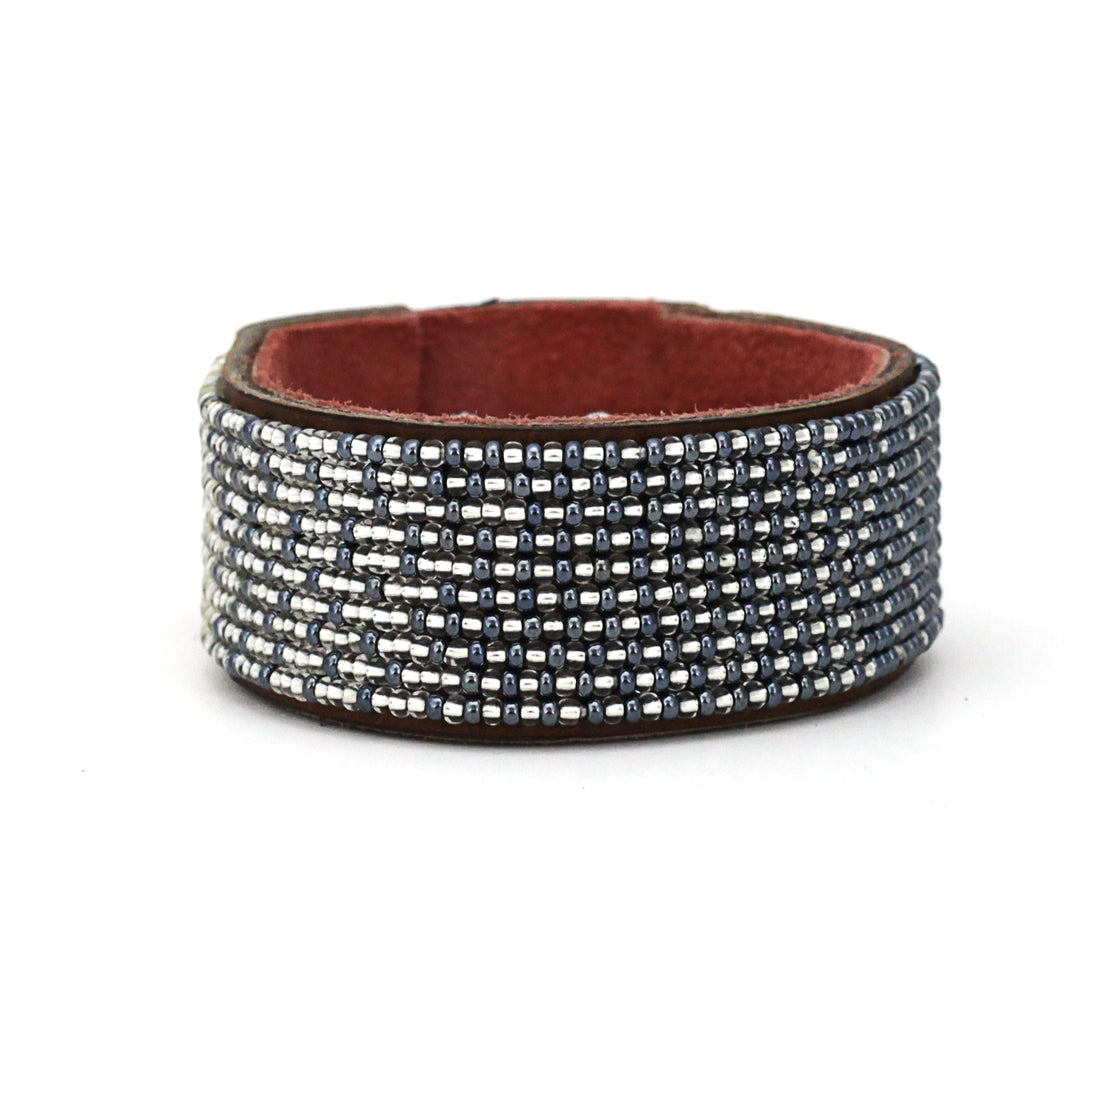 Ombre Slate and Silver Beaded Leather Cuff